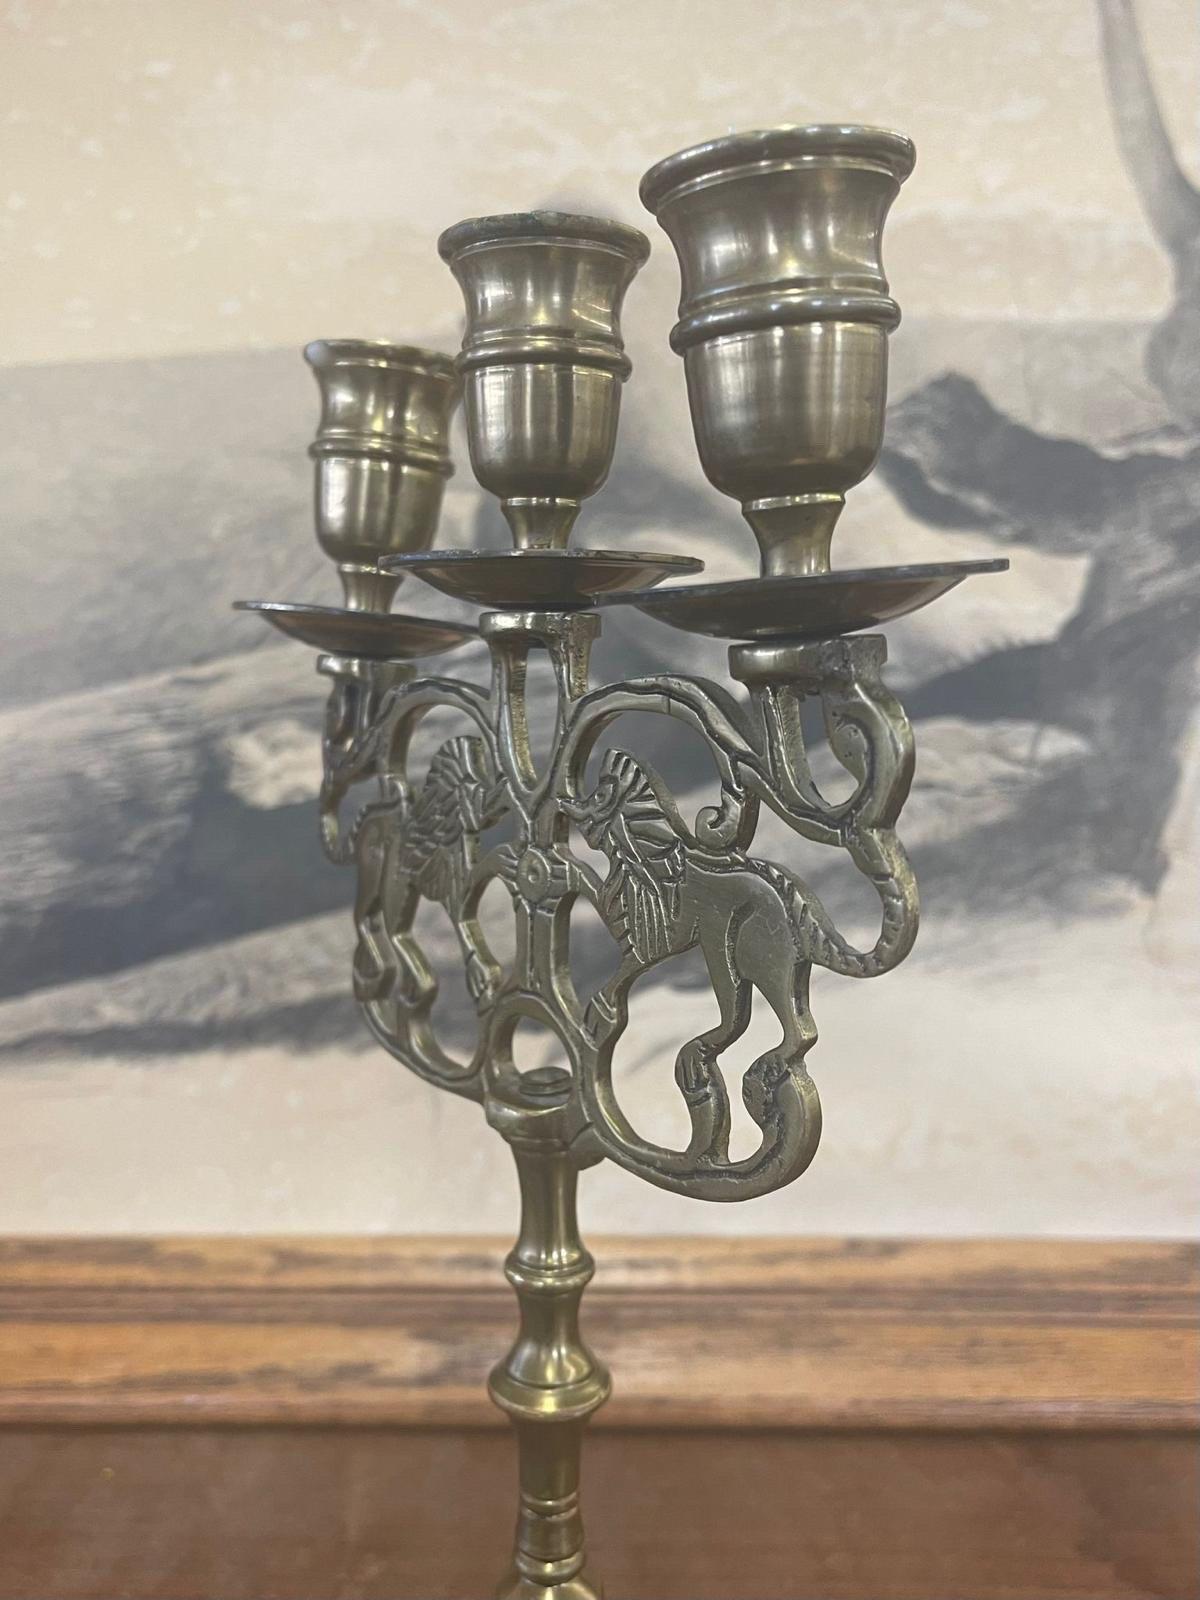 This Candelabra Features a Motif of Two Lions. May need to be Cleaned as Pictured. Vintage Condition Consistent with Age.

Dimensions. 7 W ; 3 D ; 12 H